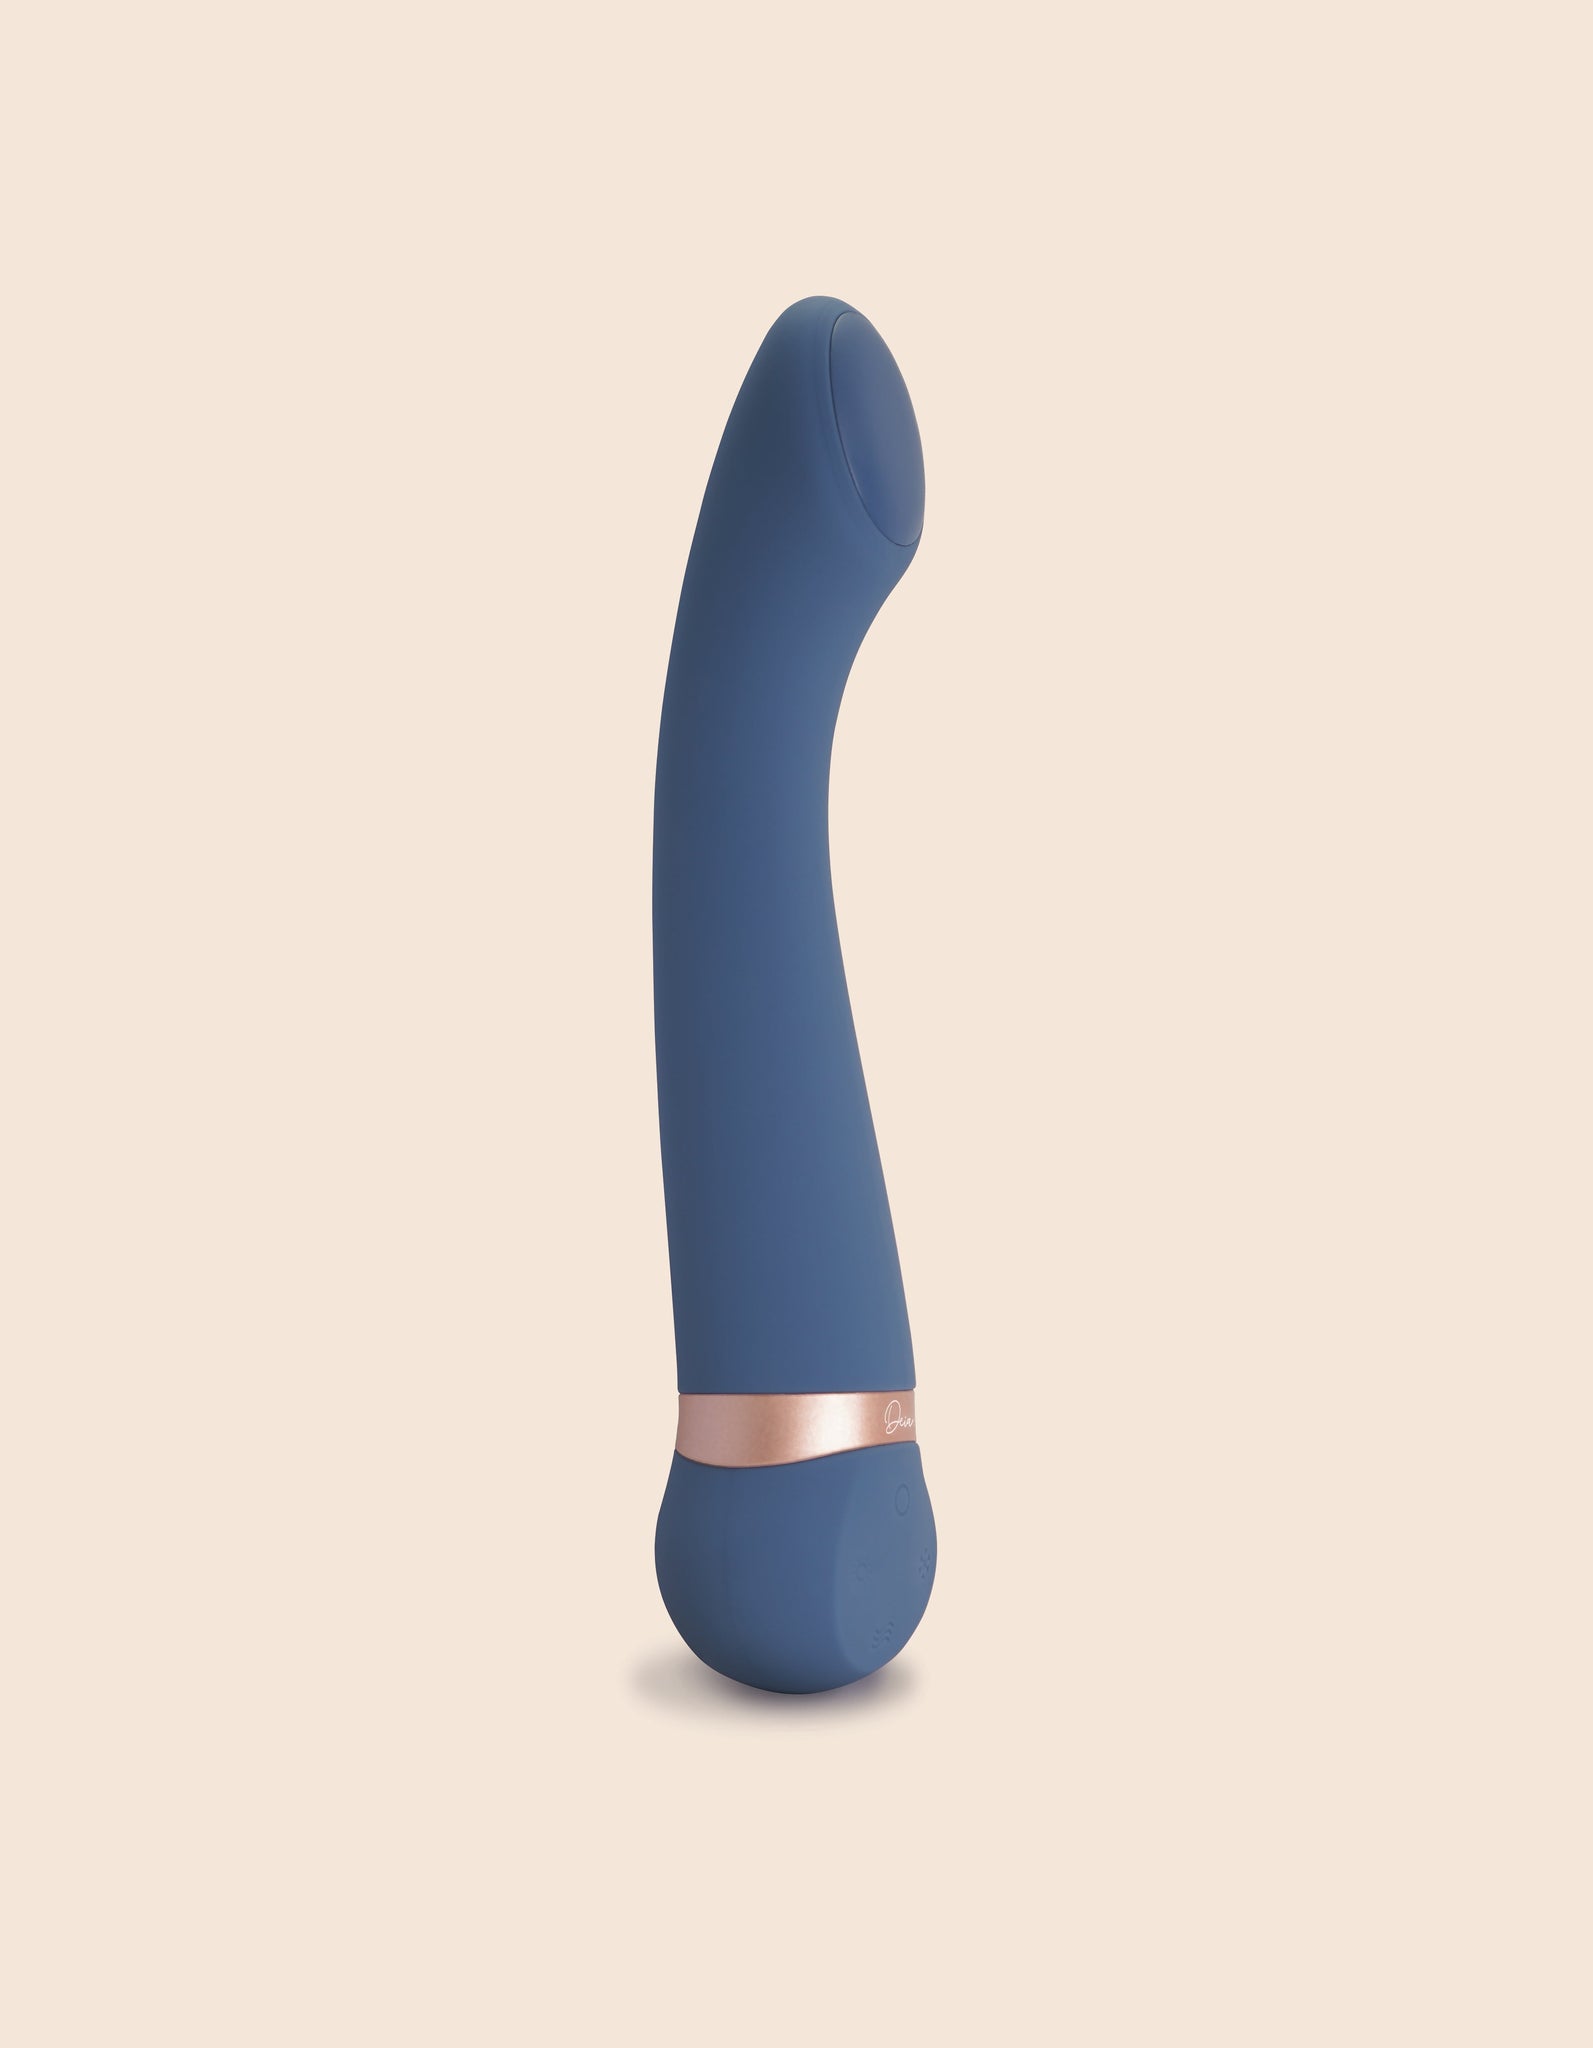 Diea's Hot & Cold vibrator being shown in vertical side view